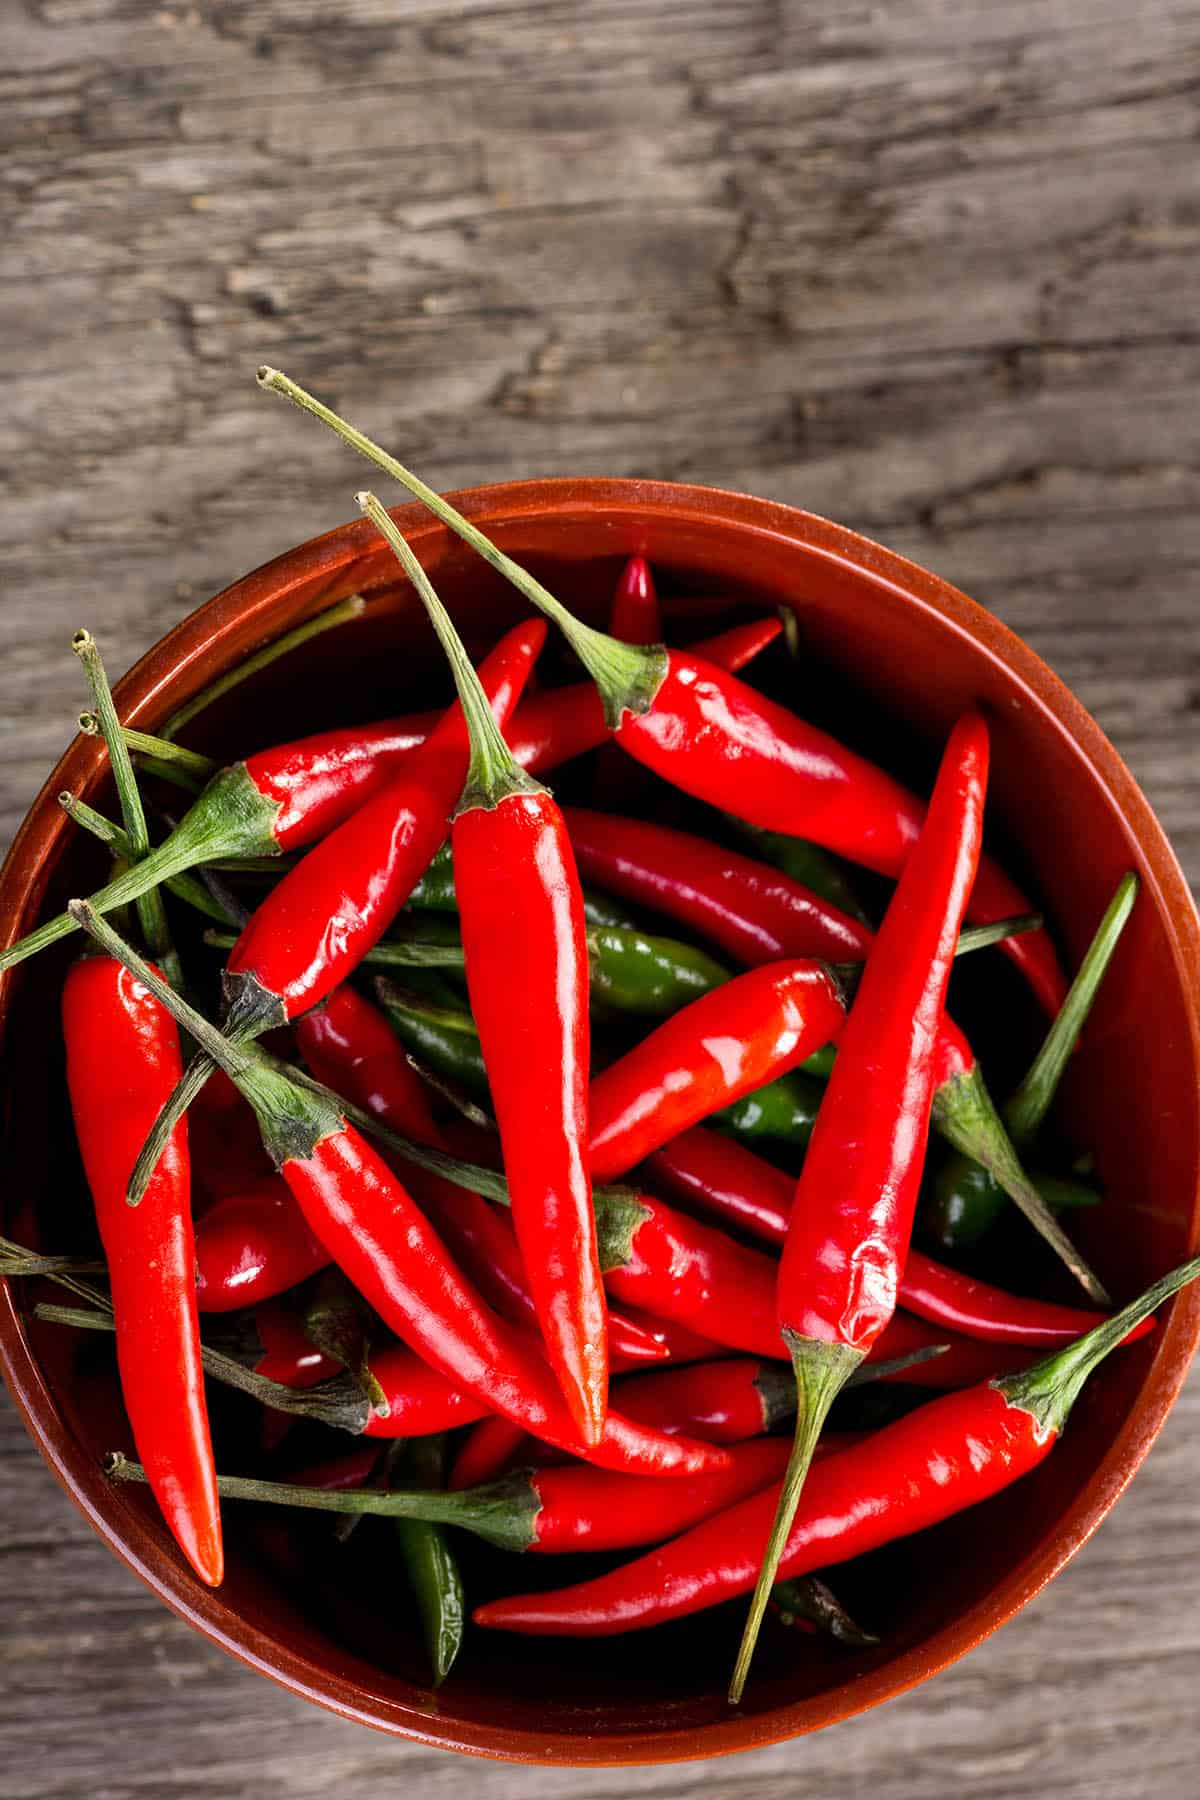 How To Store Chili Peppers